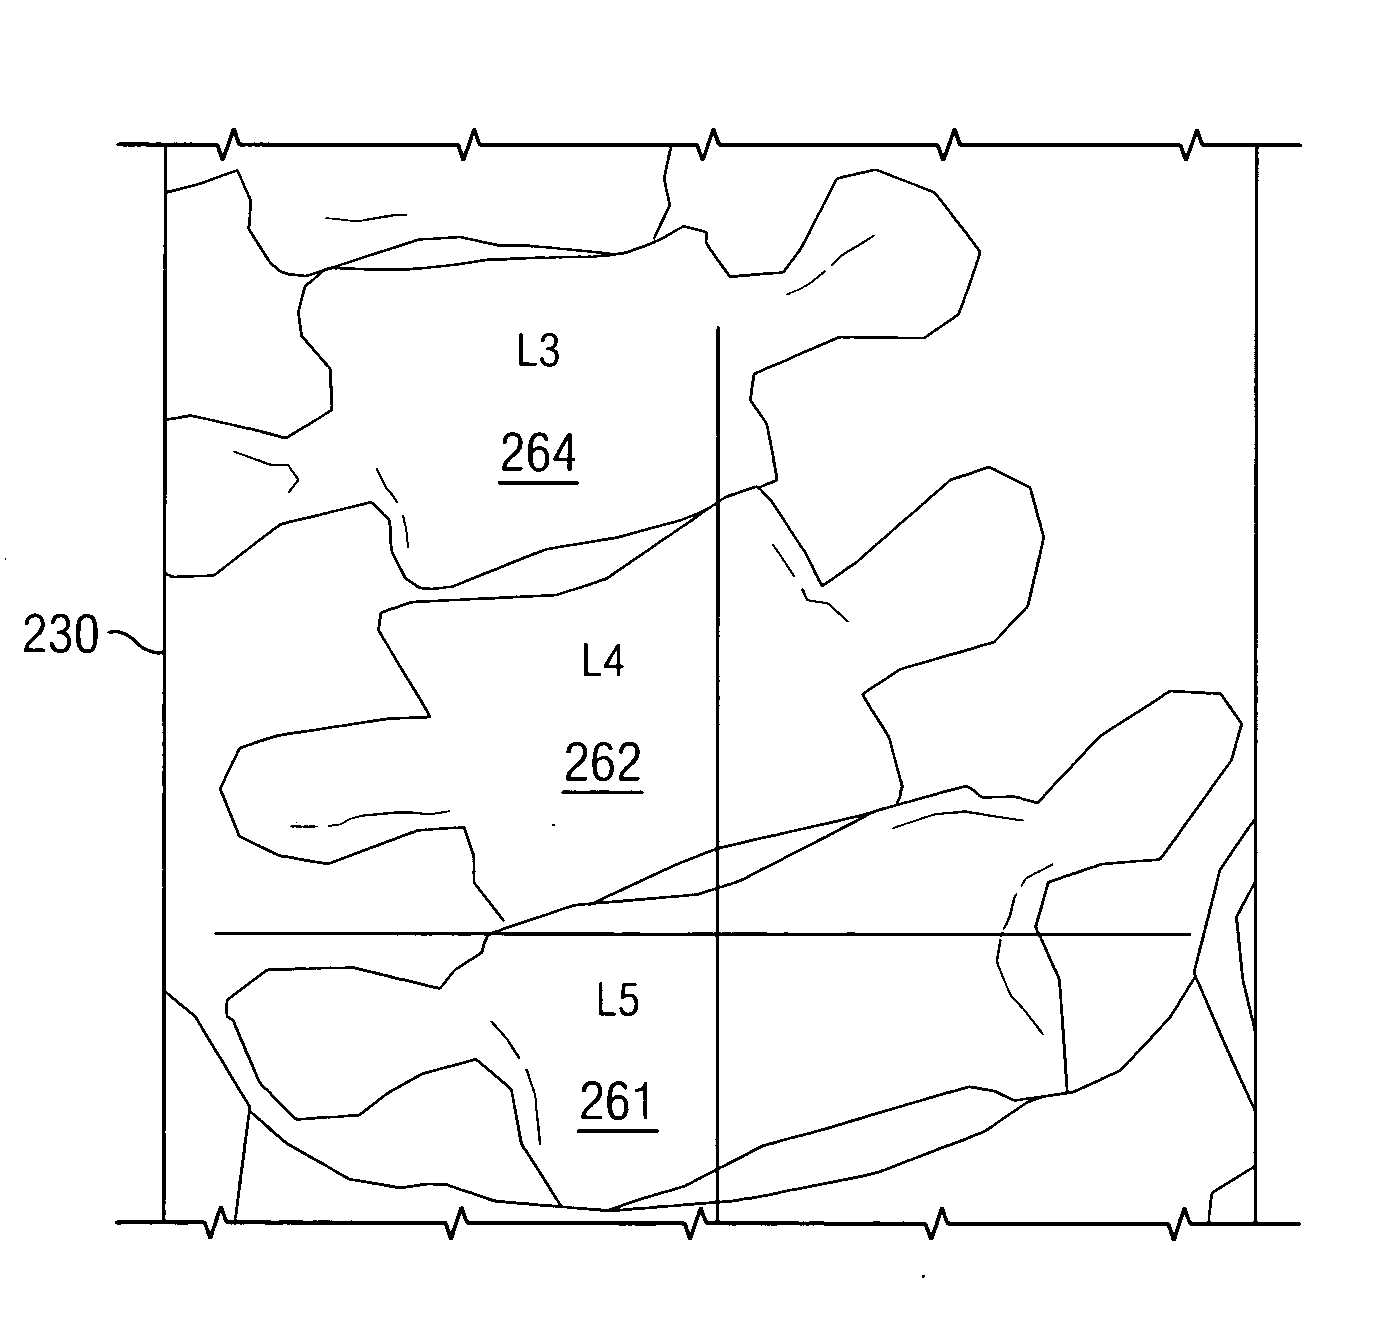 System and method of mapping images of the spine